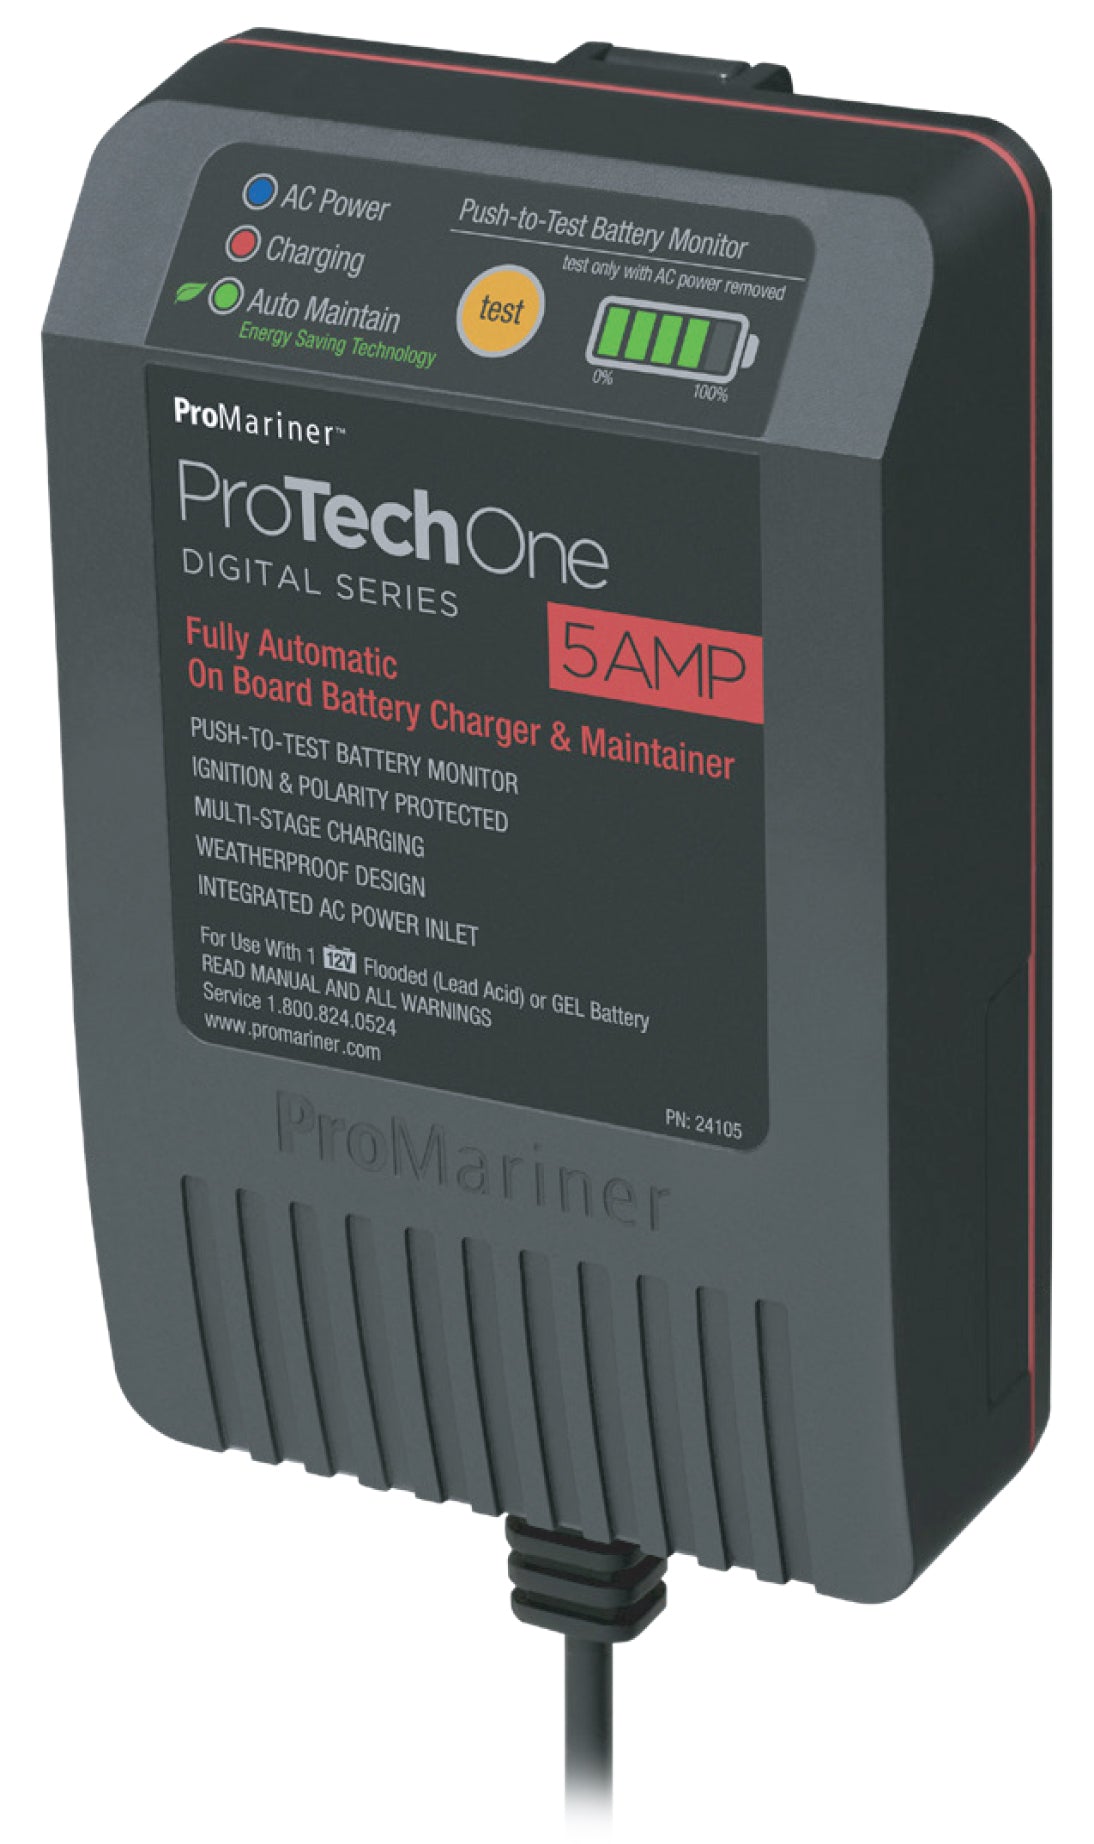 ProMariner 24104 ProTechOne Digital Series On Board Battery Charger/Maintainer, AC Inlet with Self-Closing Cover - 4 Amp